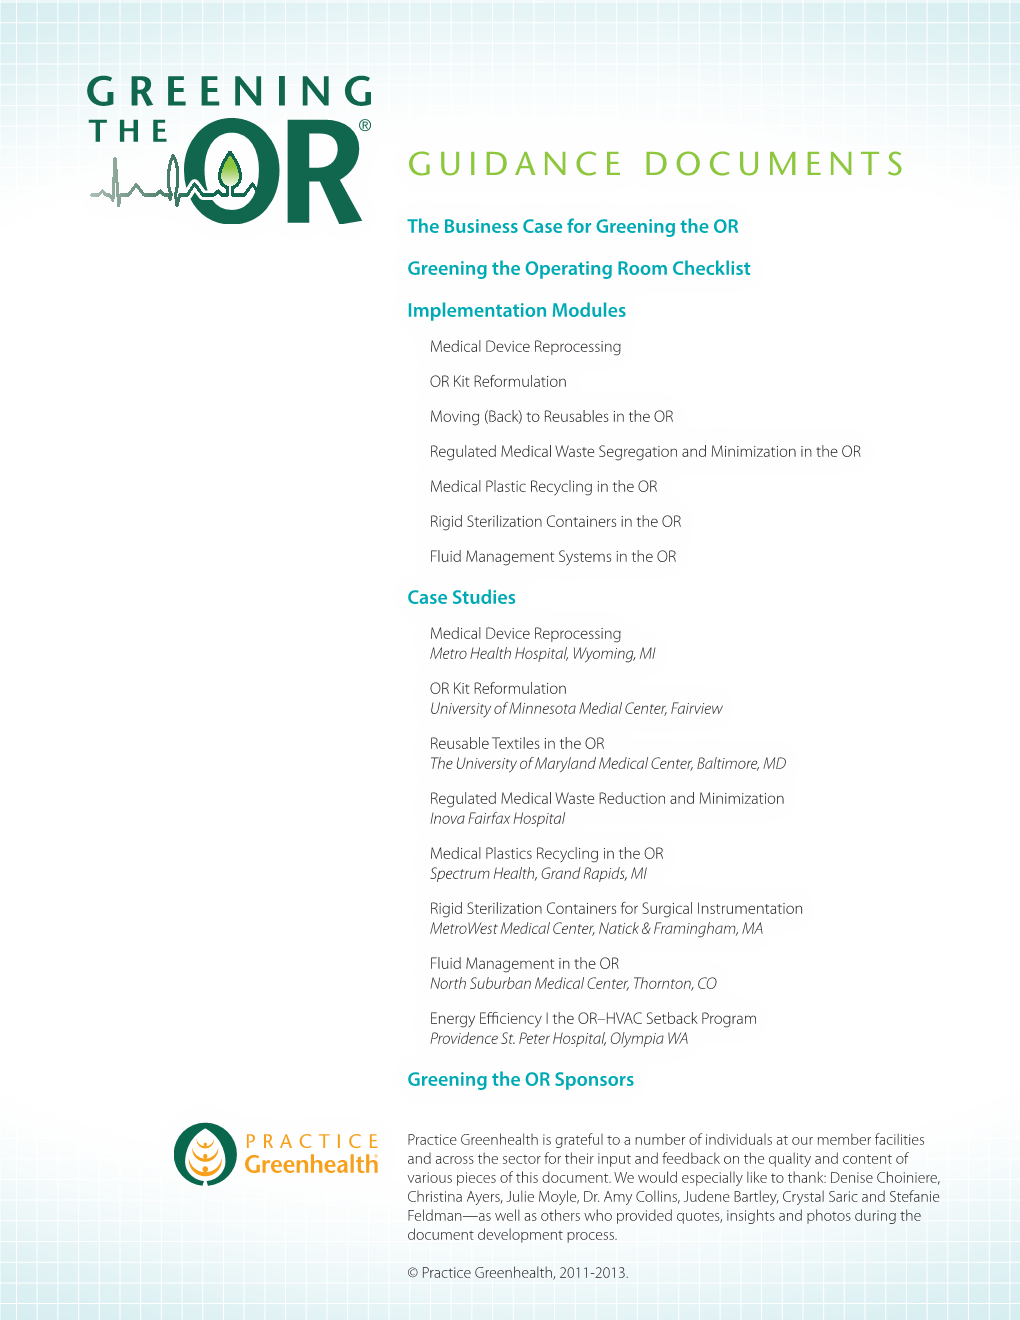 Guidance Documents